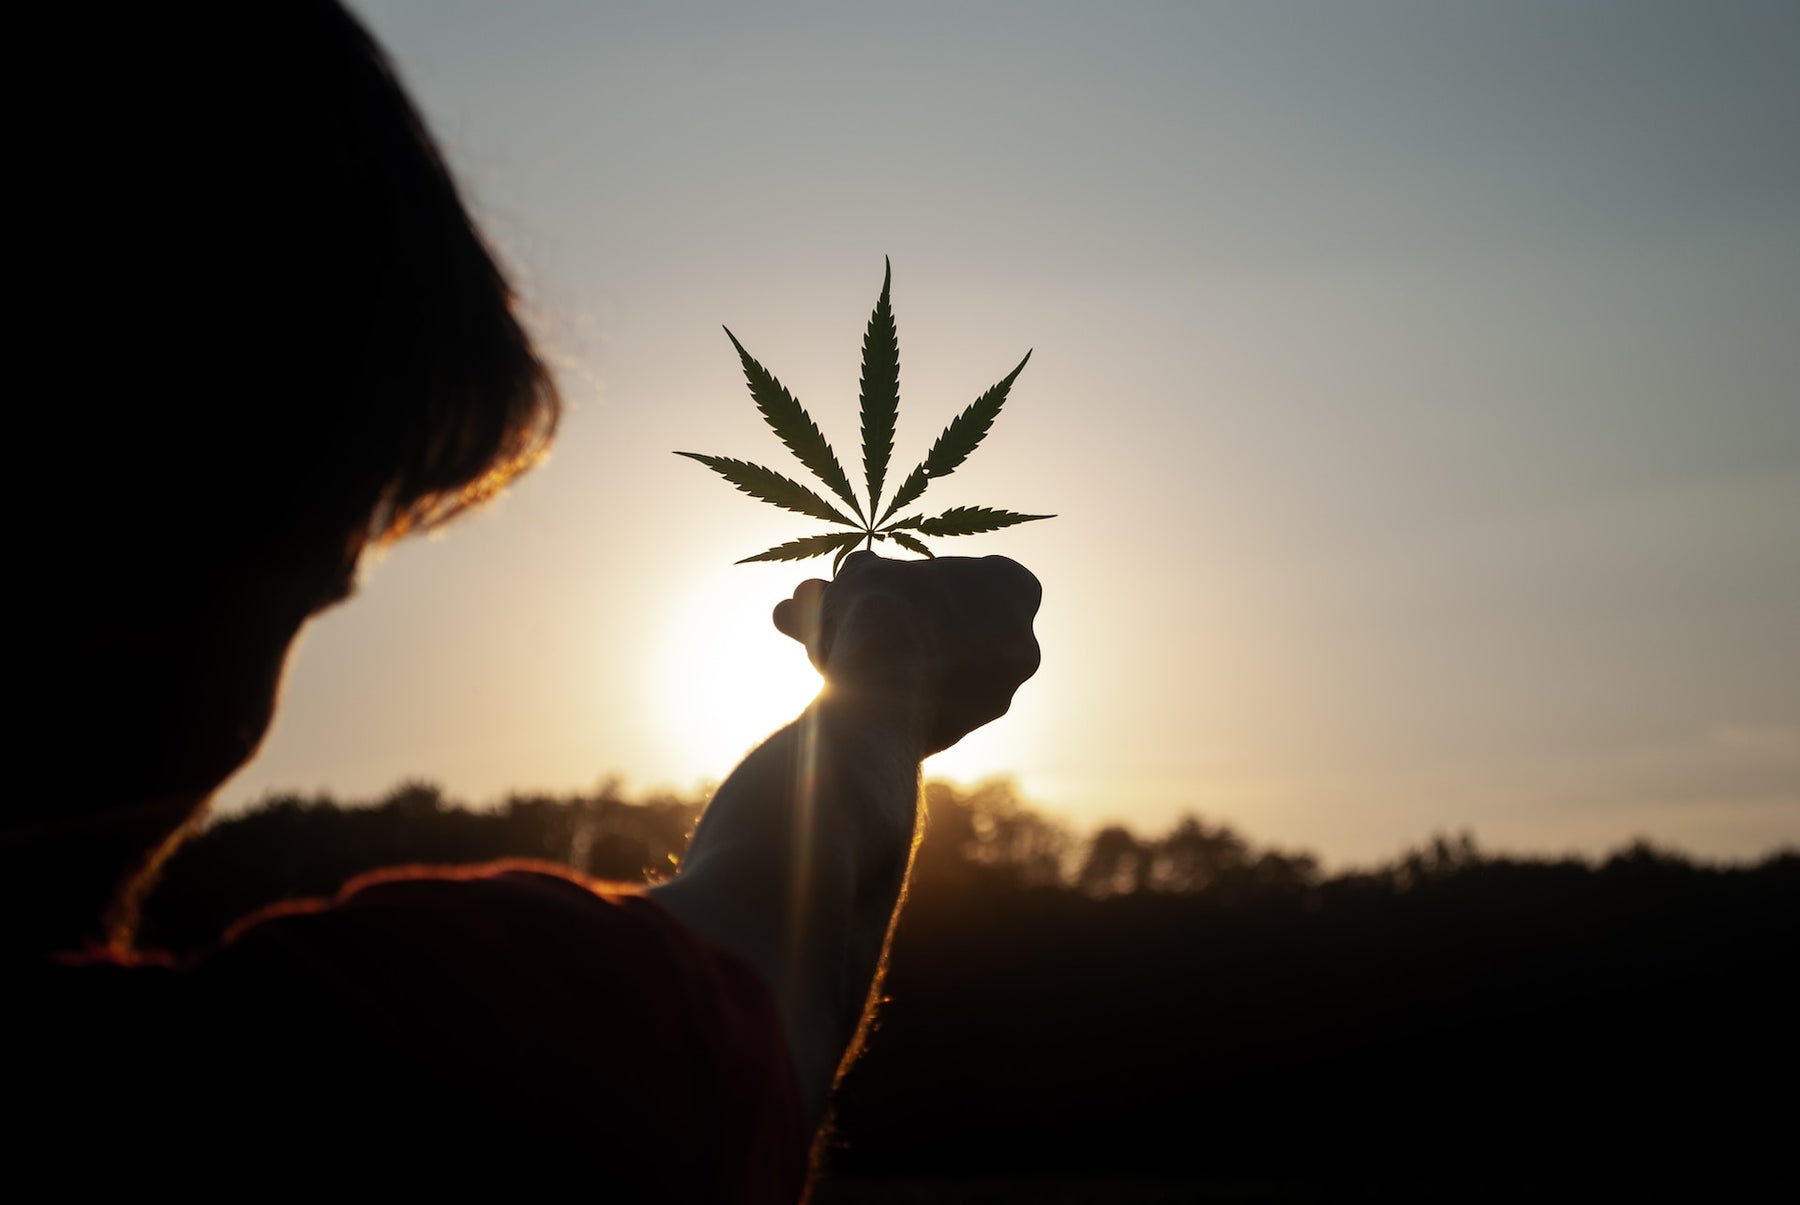 Embracing Nature: Celebrating Cannabis Culture at the End of May